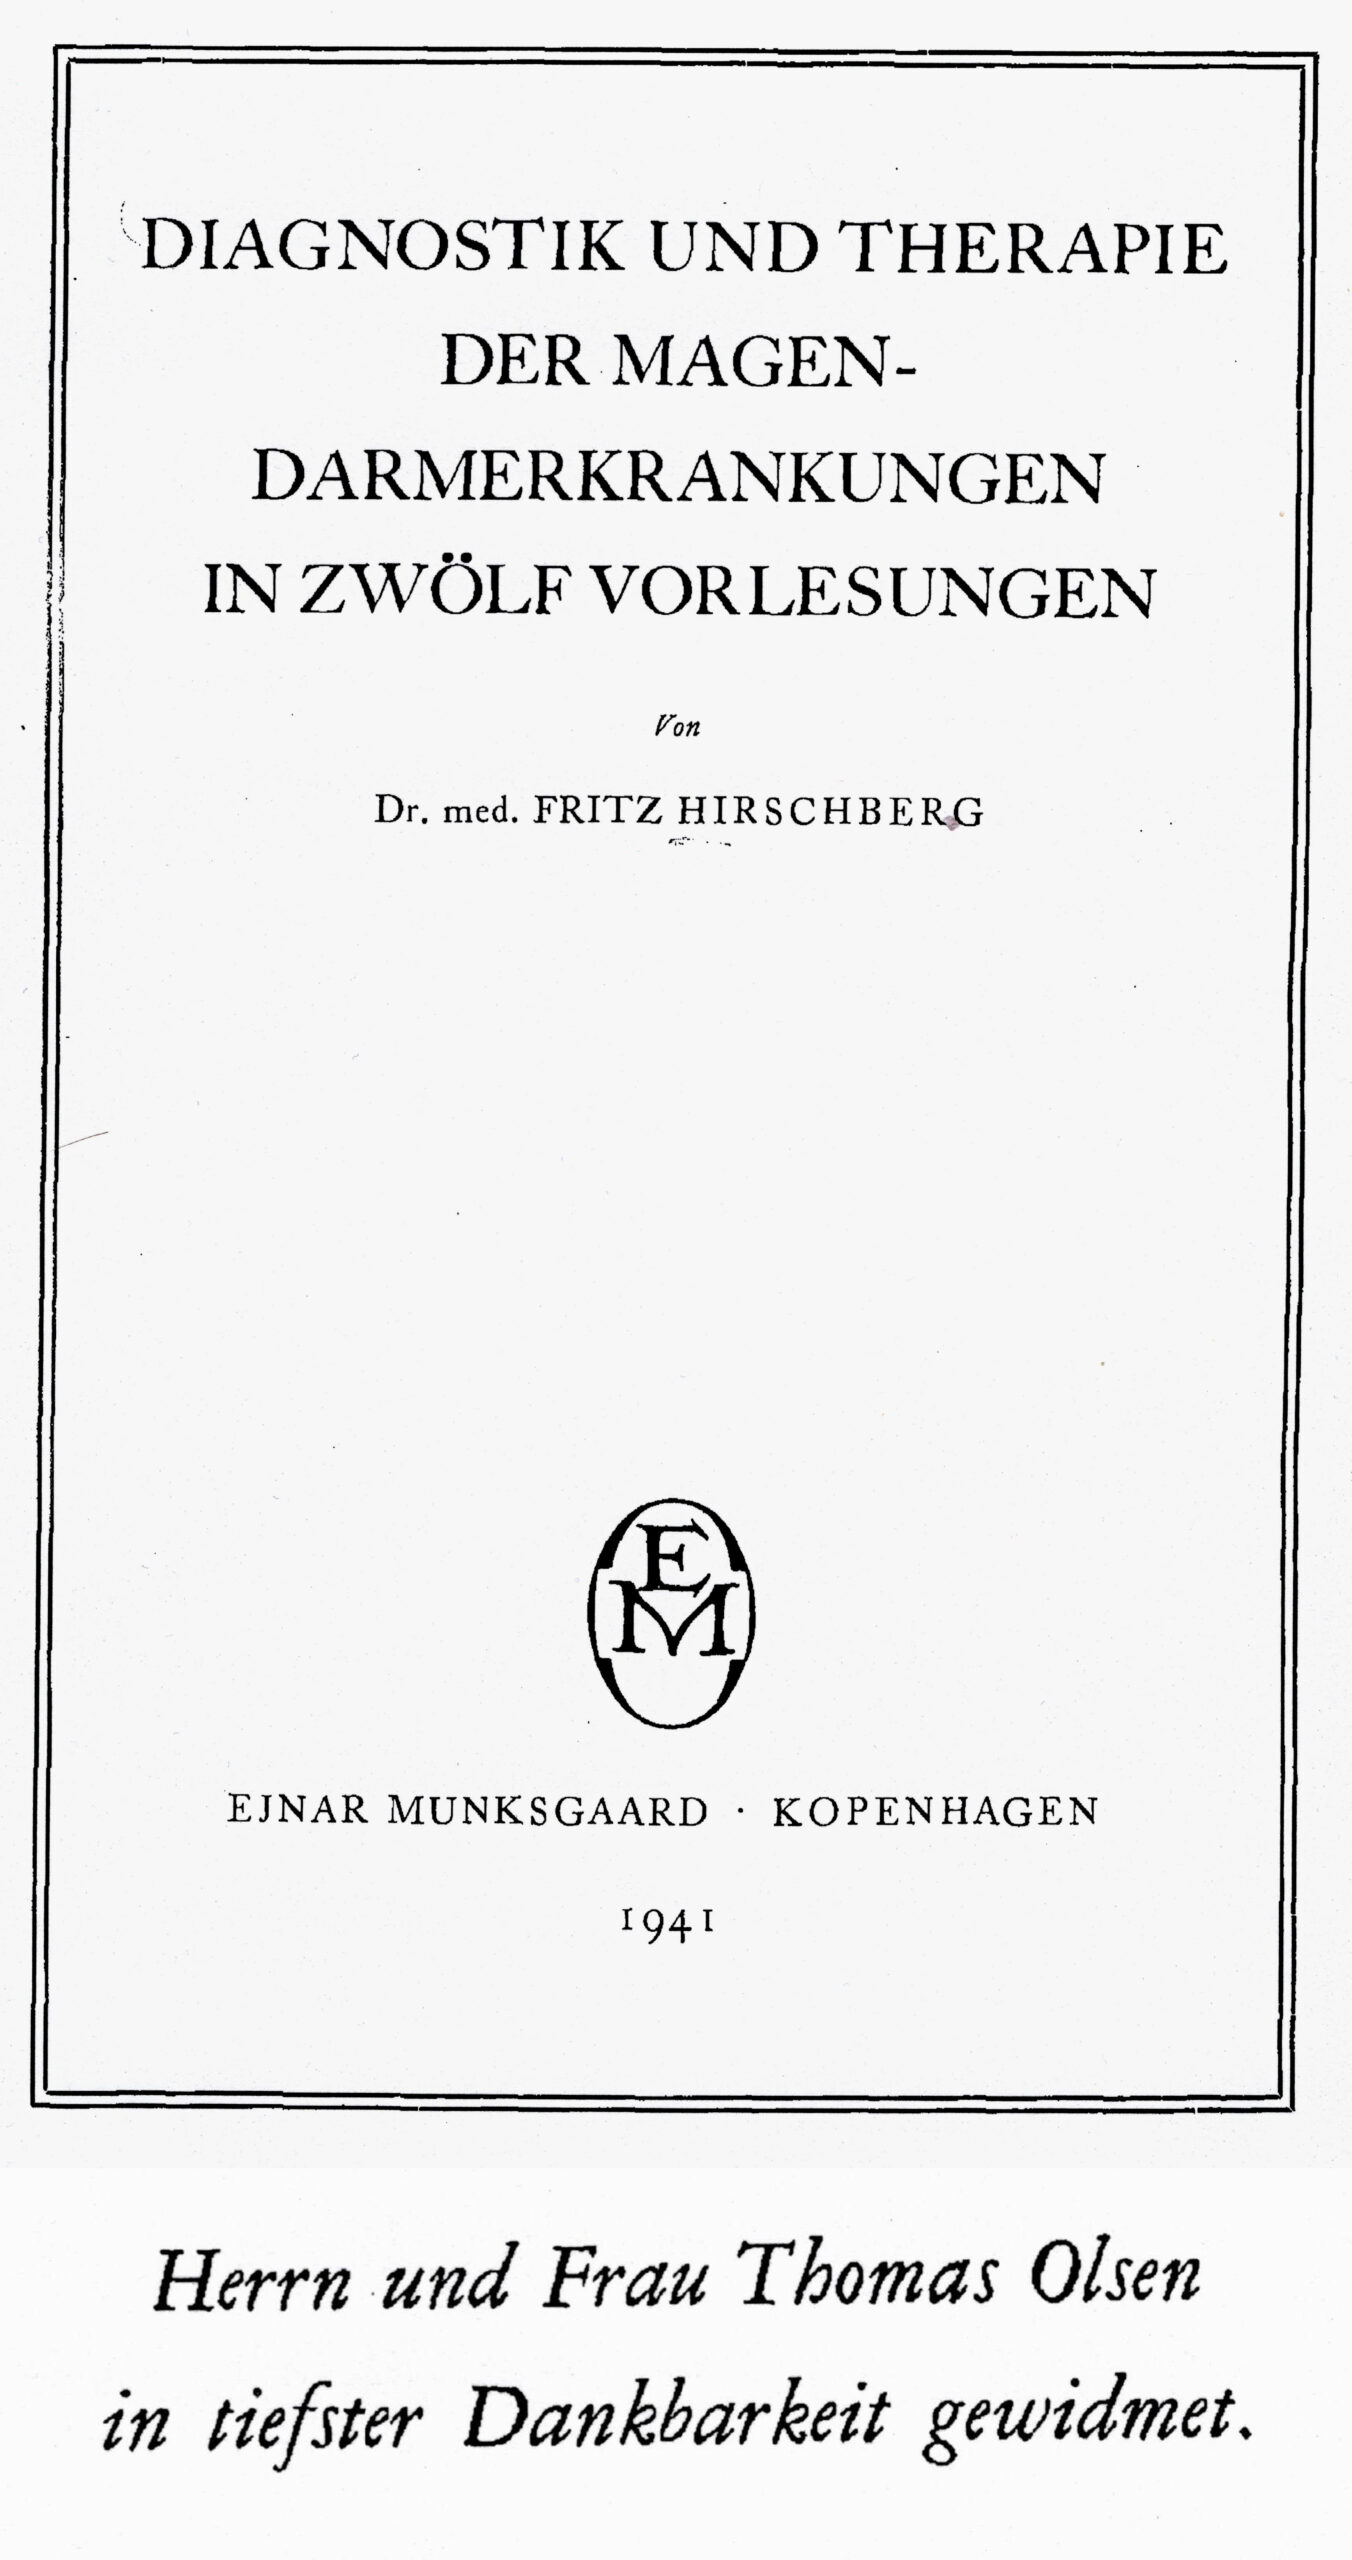 Fritz Hirschberg's publication in exile, 1941